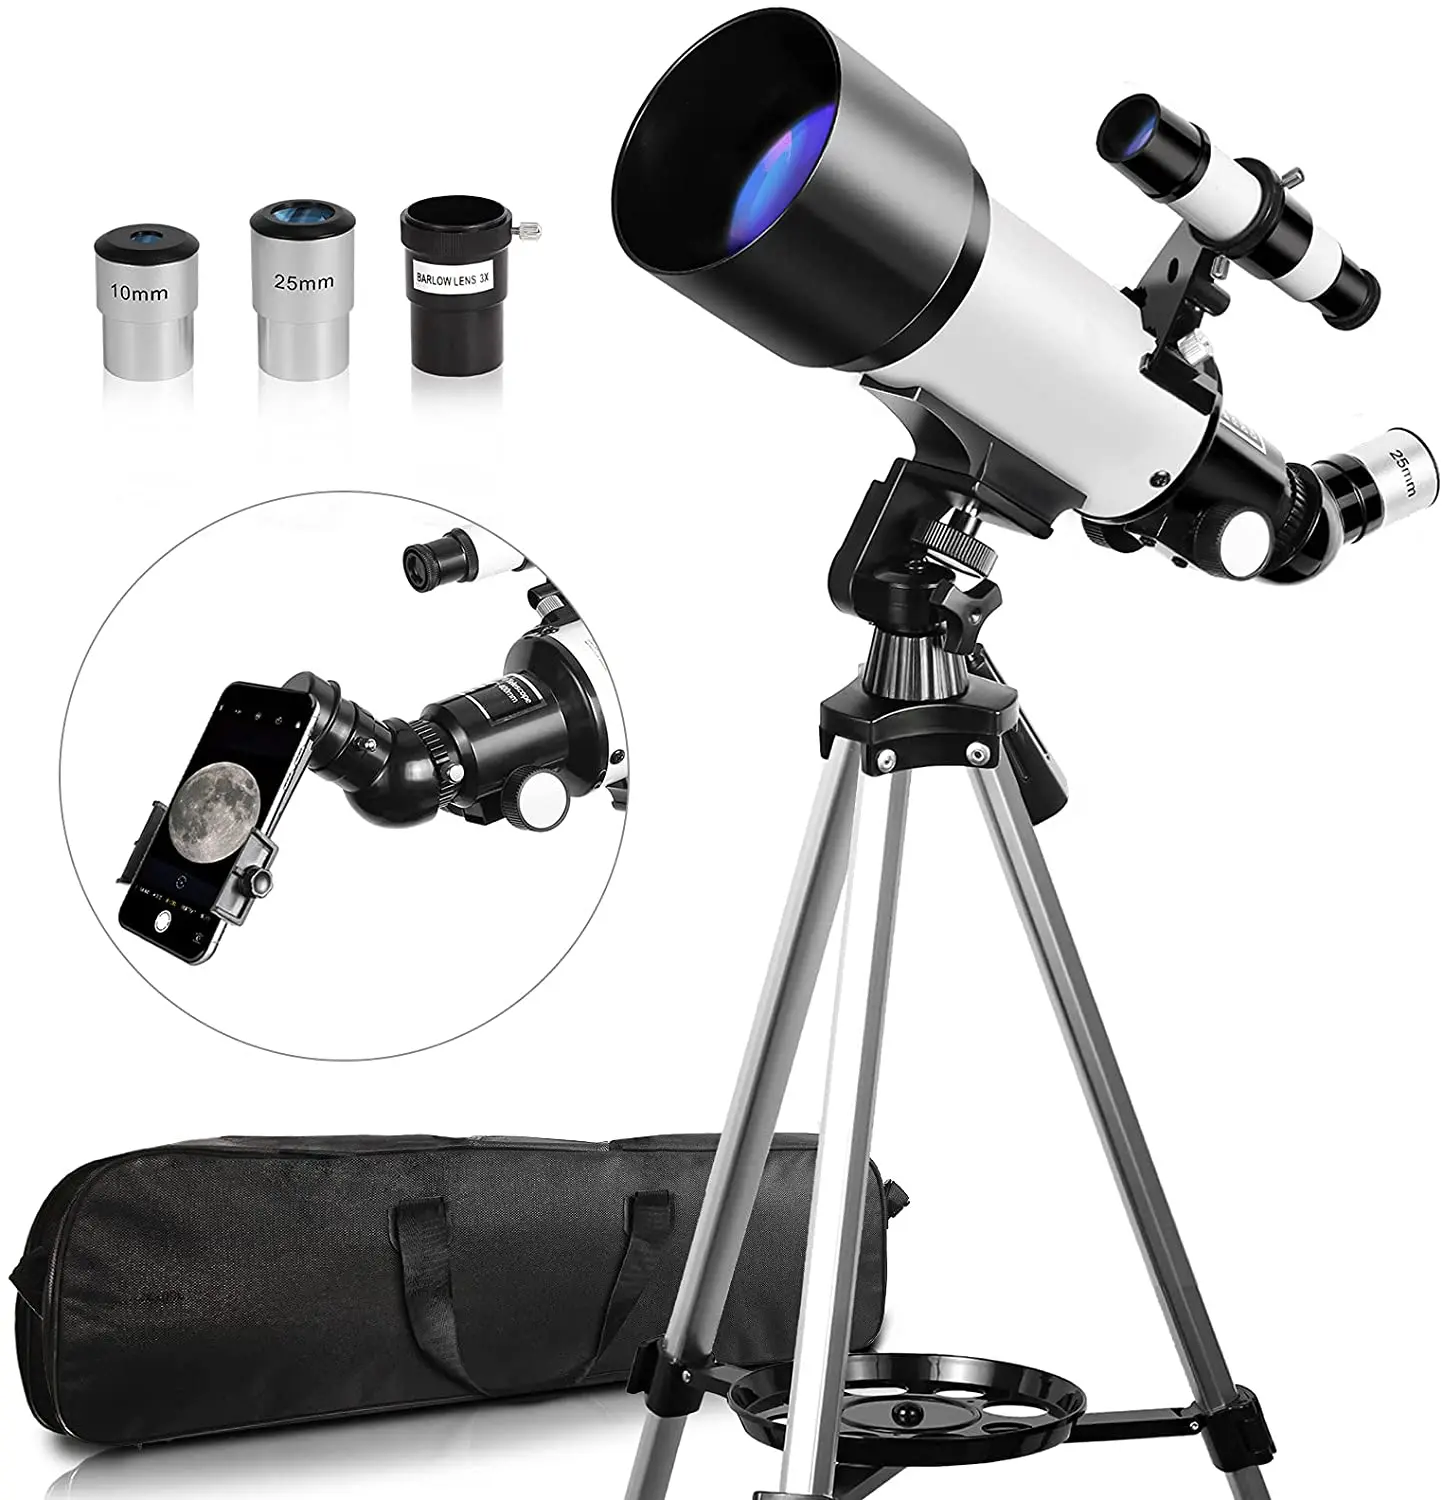 

Professional Astronomical Telescope for Space Monocular 70mm Aperture 400mm Focal Length Powerful Binoculars With Tripod